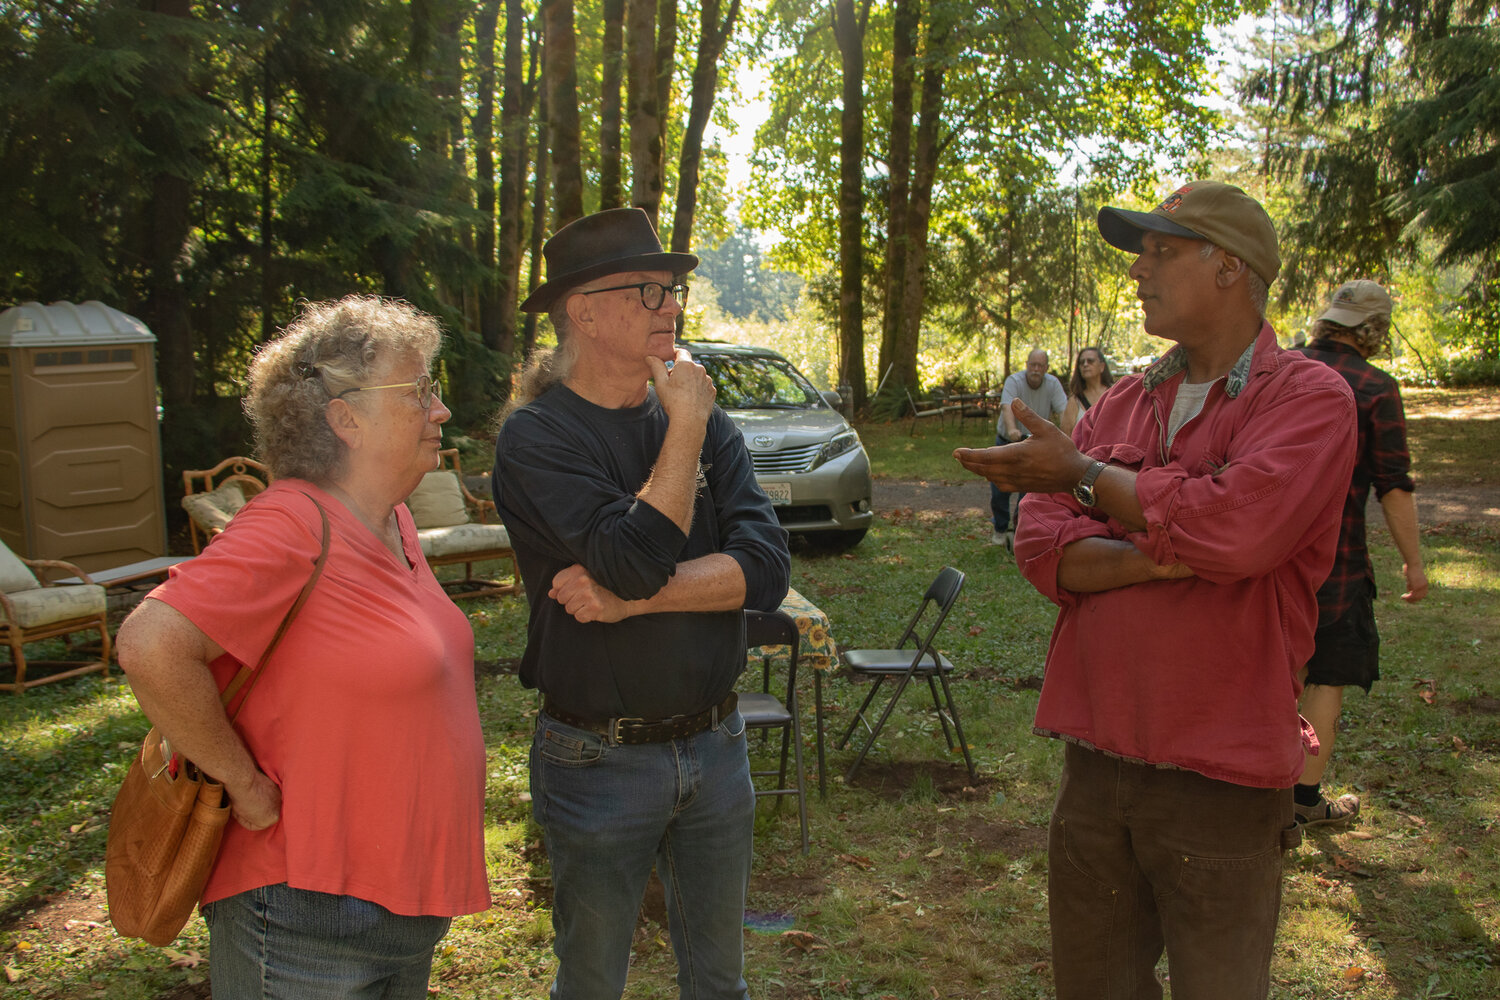 Harry Bhagwandin, left, talks to visitors on Sunday, Oct. 8, at Shady Grove Orchards, a farm he owns dedicated to growing nut-producing trees.